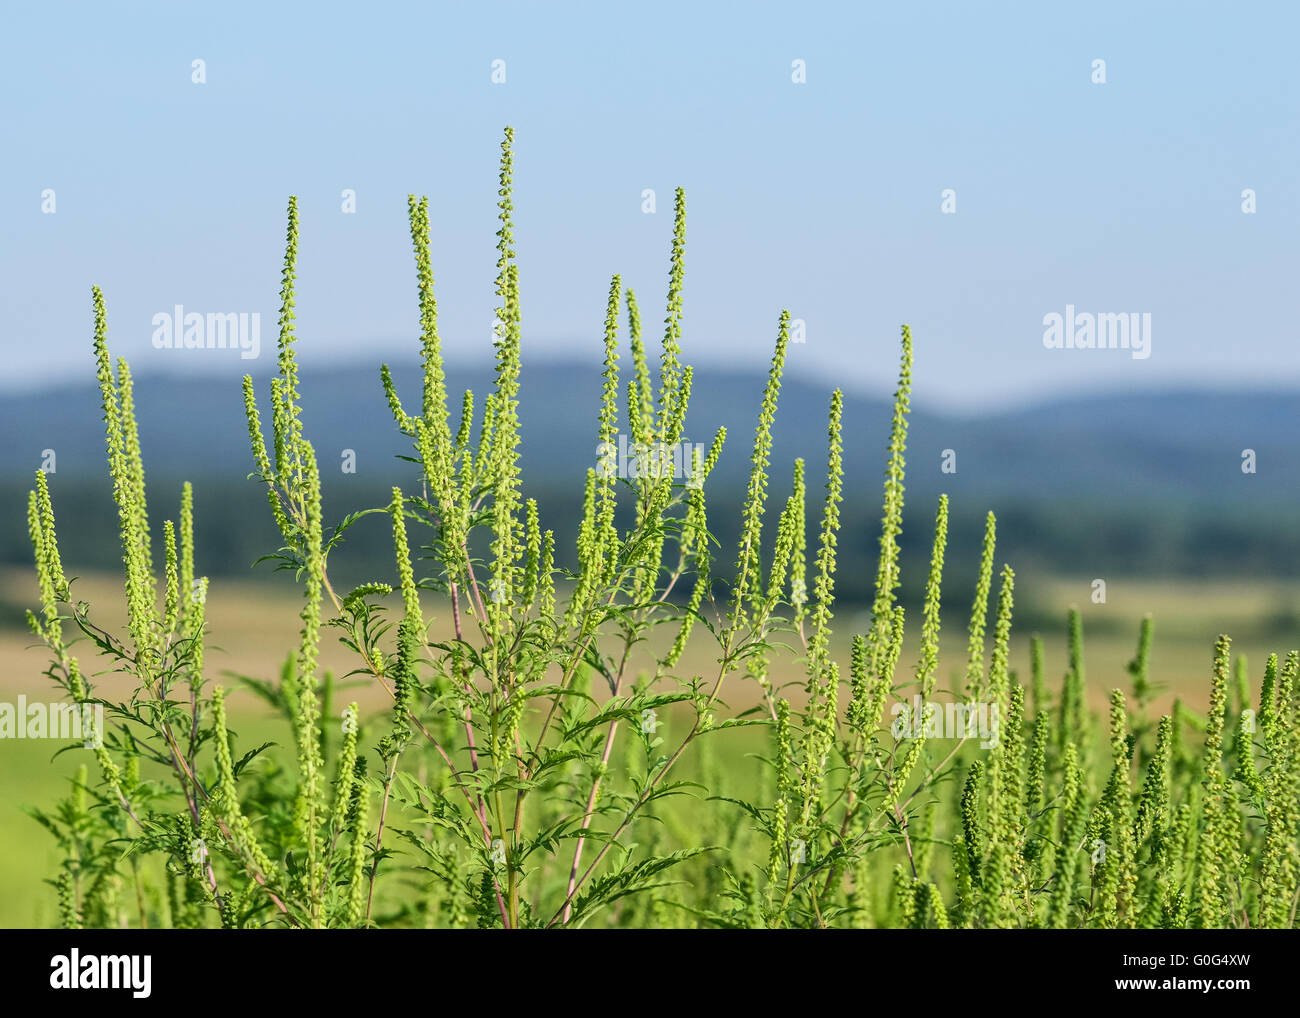 Ragweed or ragweed allergy triggers from Stock Photo